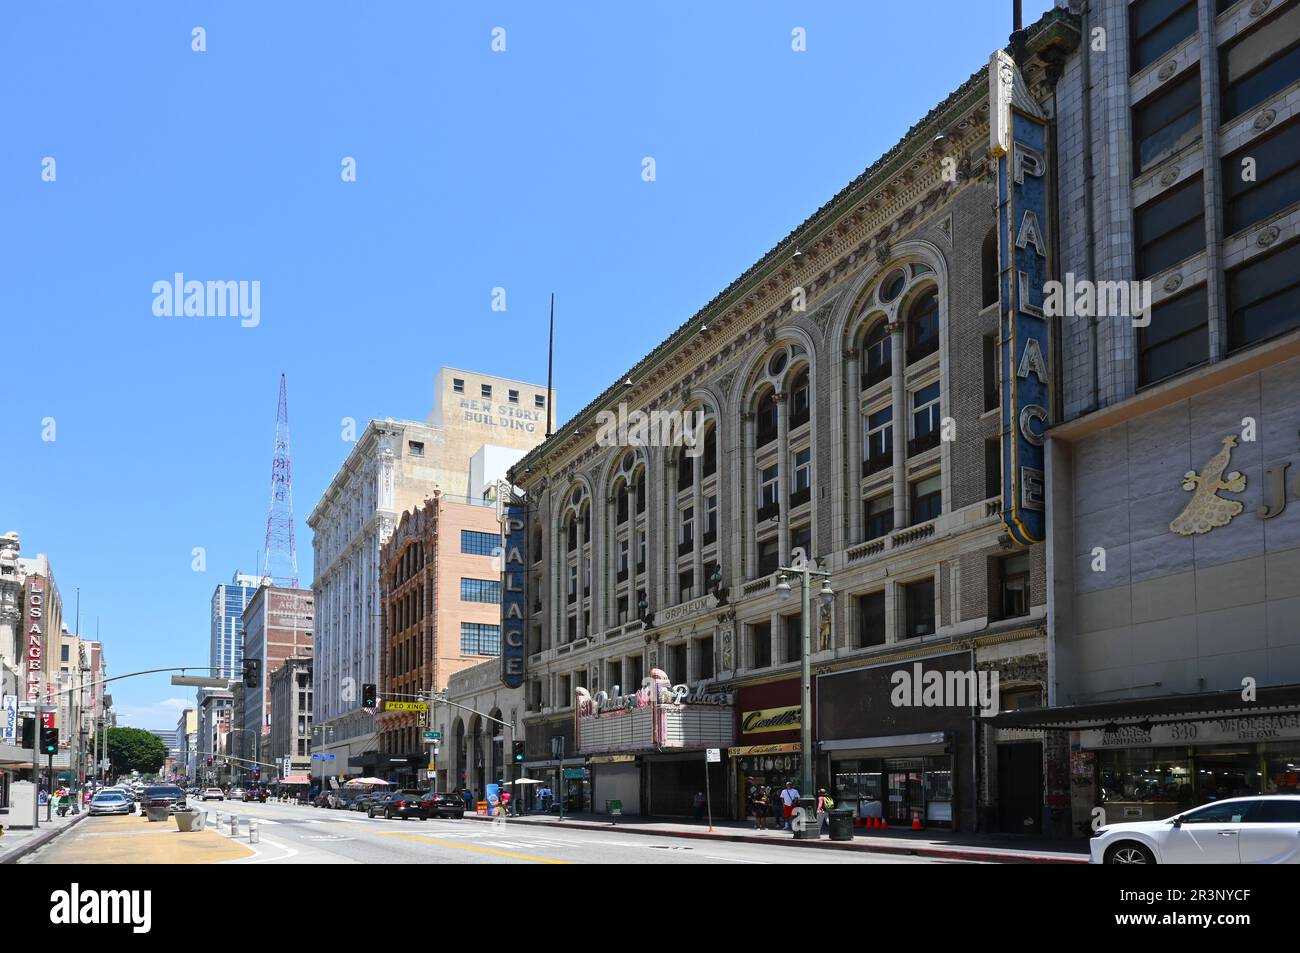 LOS ANGELES, CALIFORNIA - 17 MAY 2023: Looking up Broadway in Downtown Los Angeles with the Palace and Los Angeles Theatres and the KRKD radio tower. Stock Photo